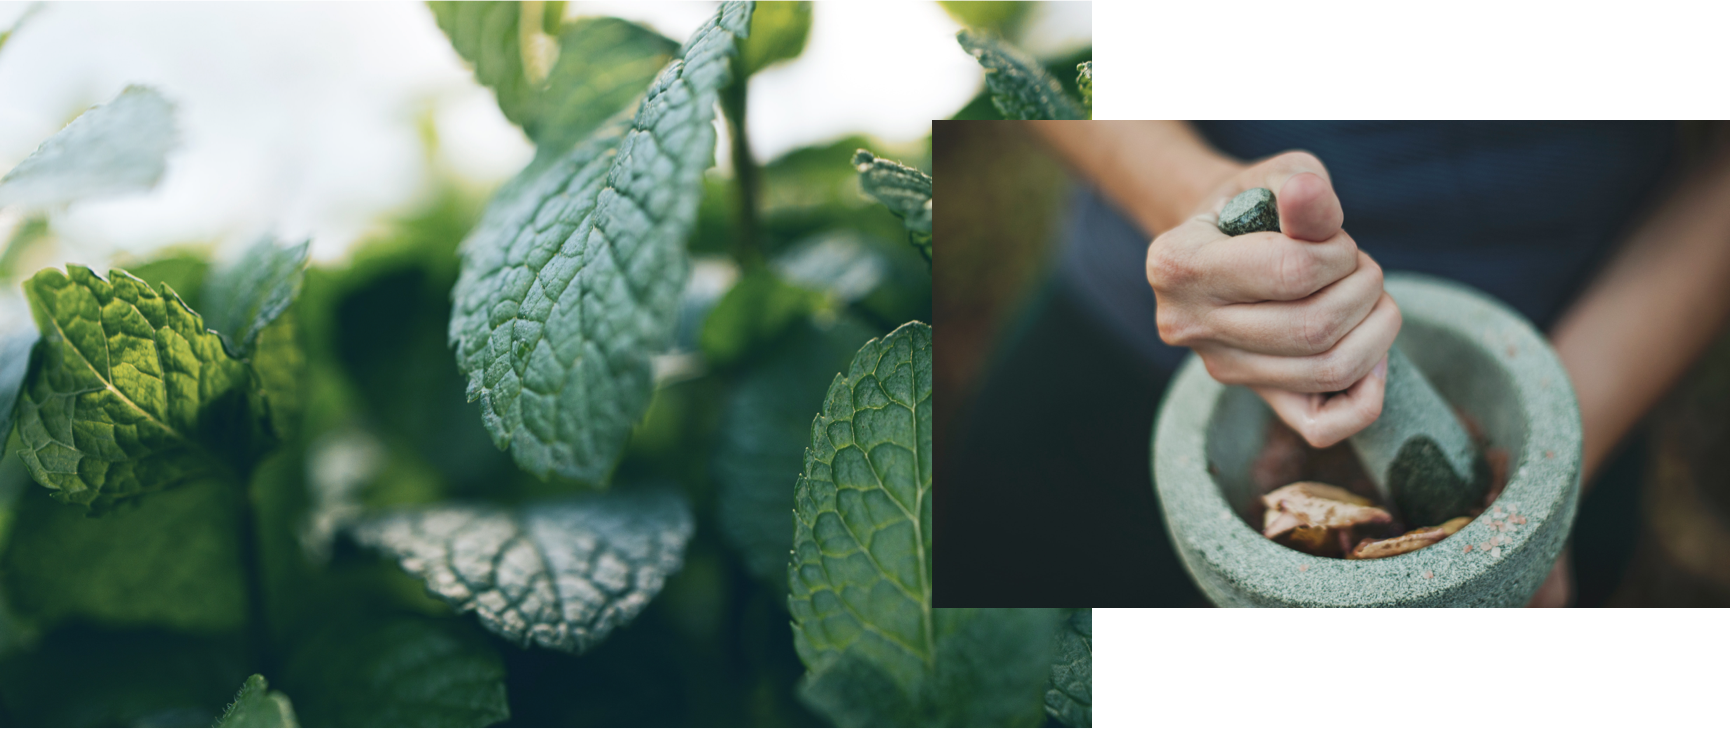 Left: Mint leaves. Right: Hands muddling leaves with mortar and pestle.